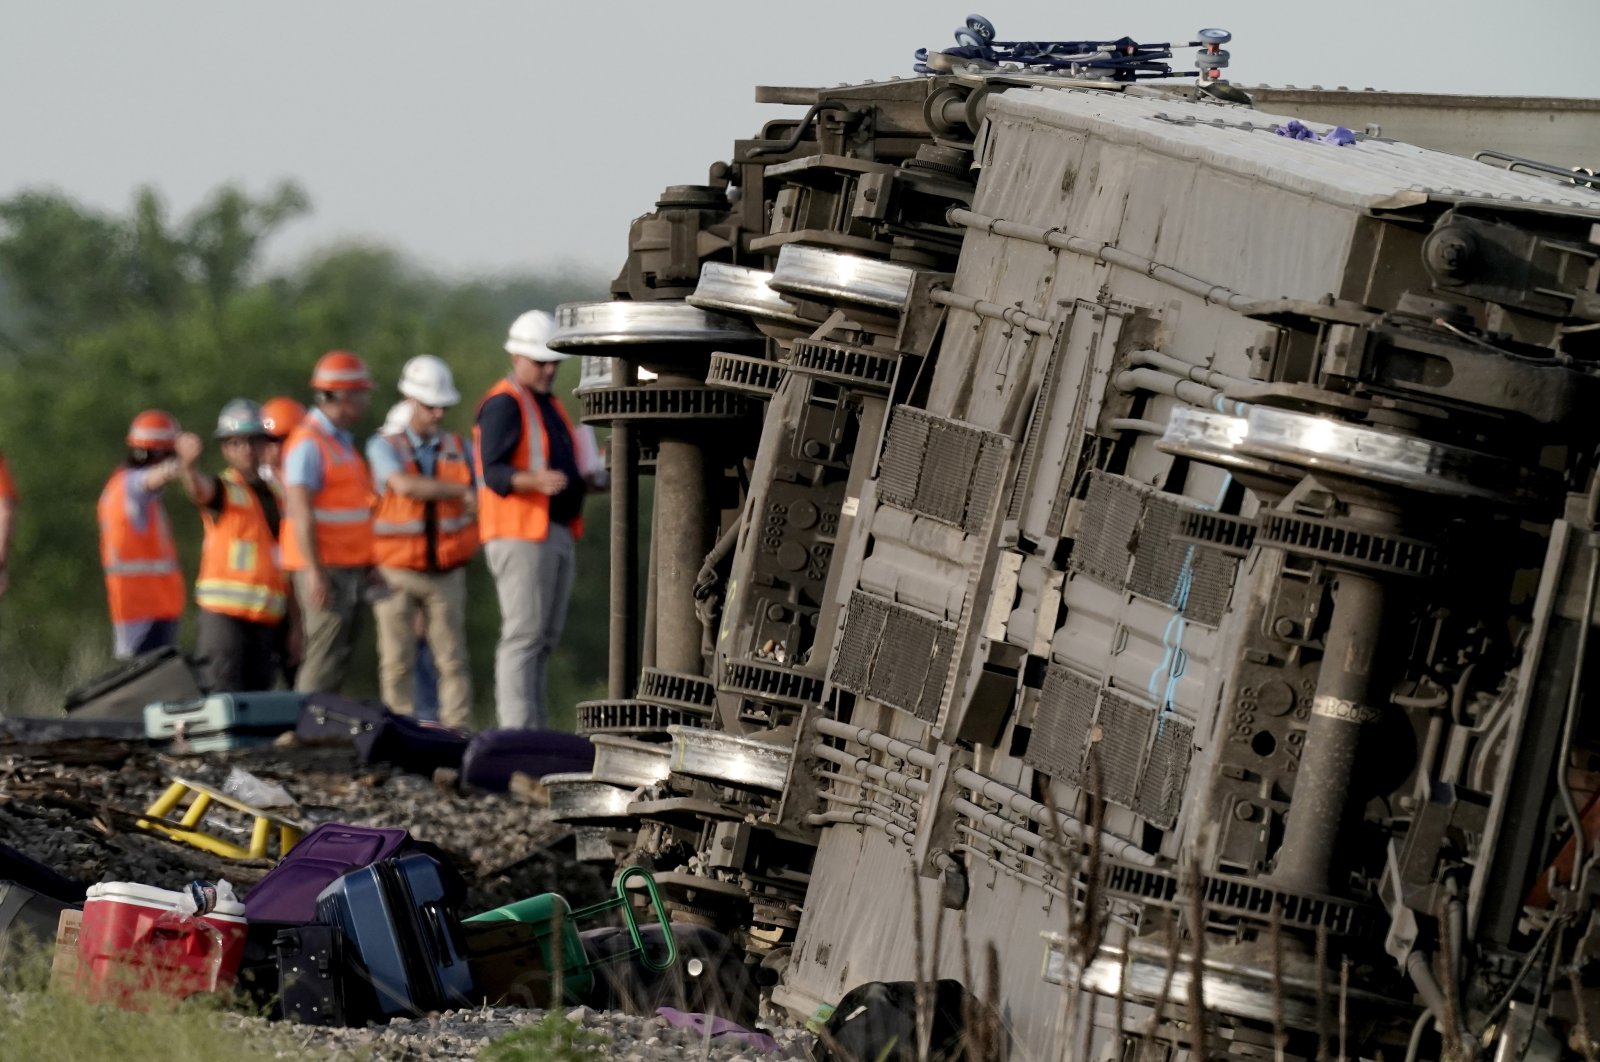 Three killed and dozens injured after Amtrak train goes off the track in Missouri